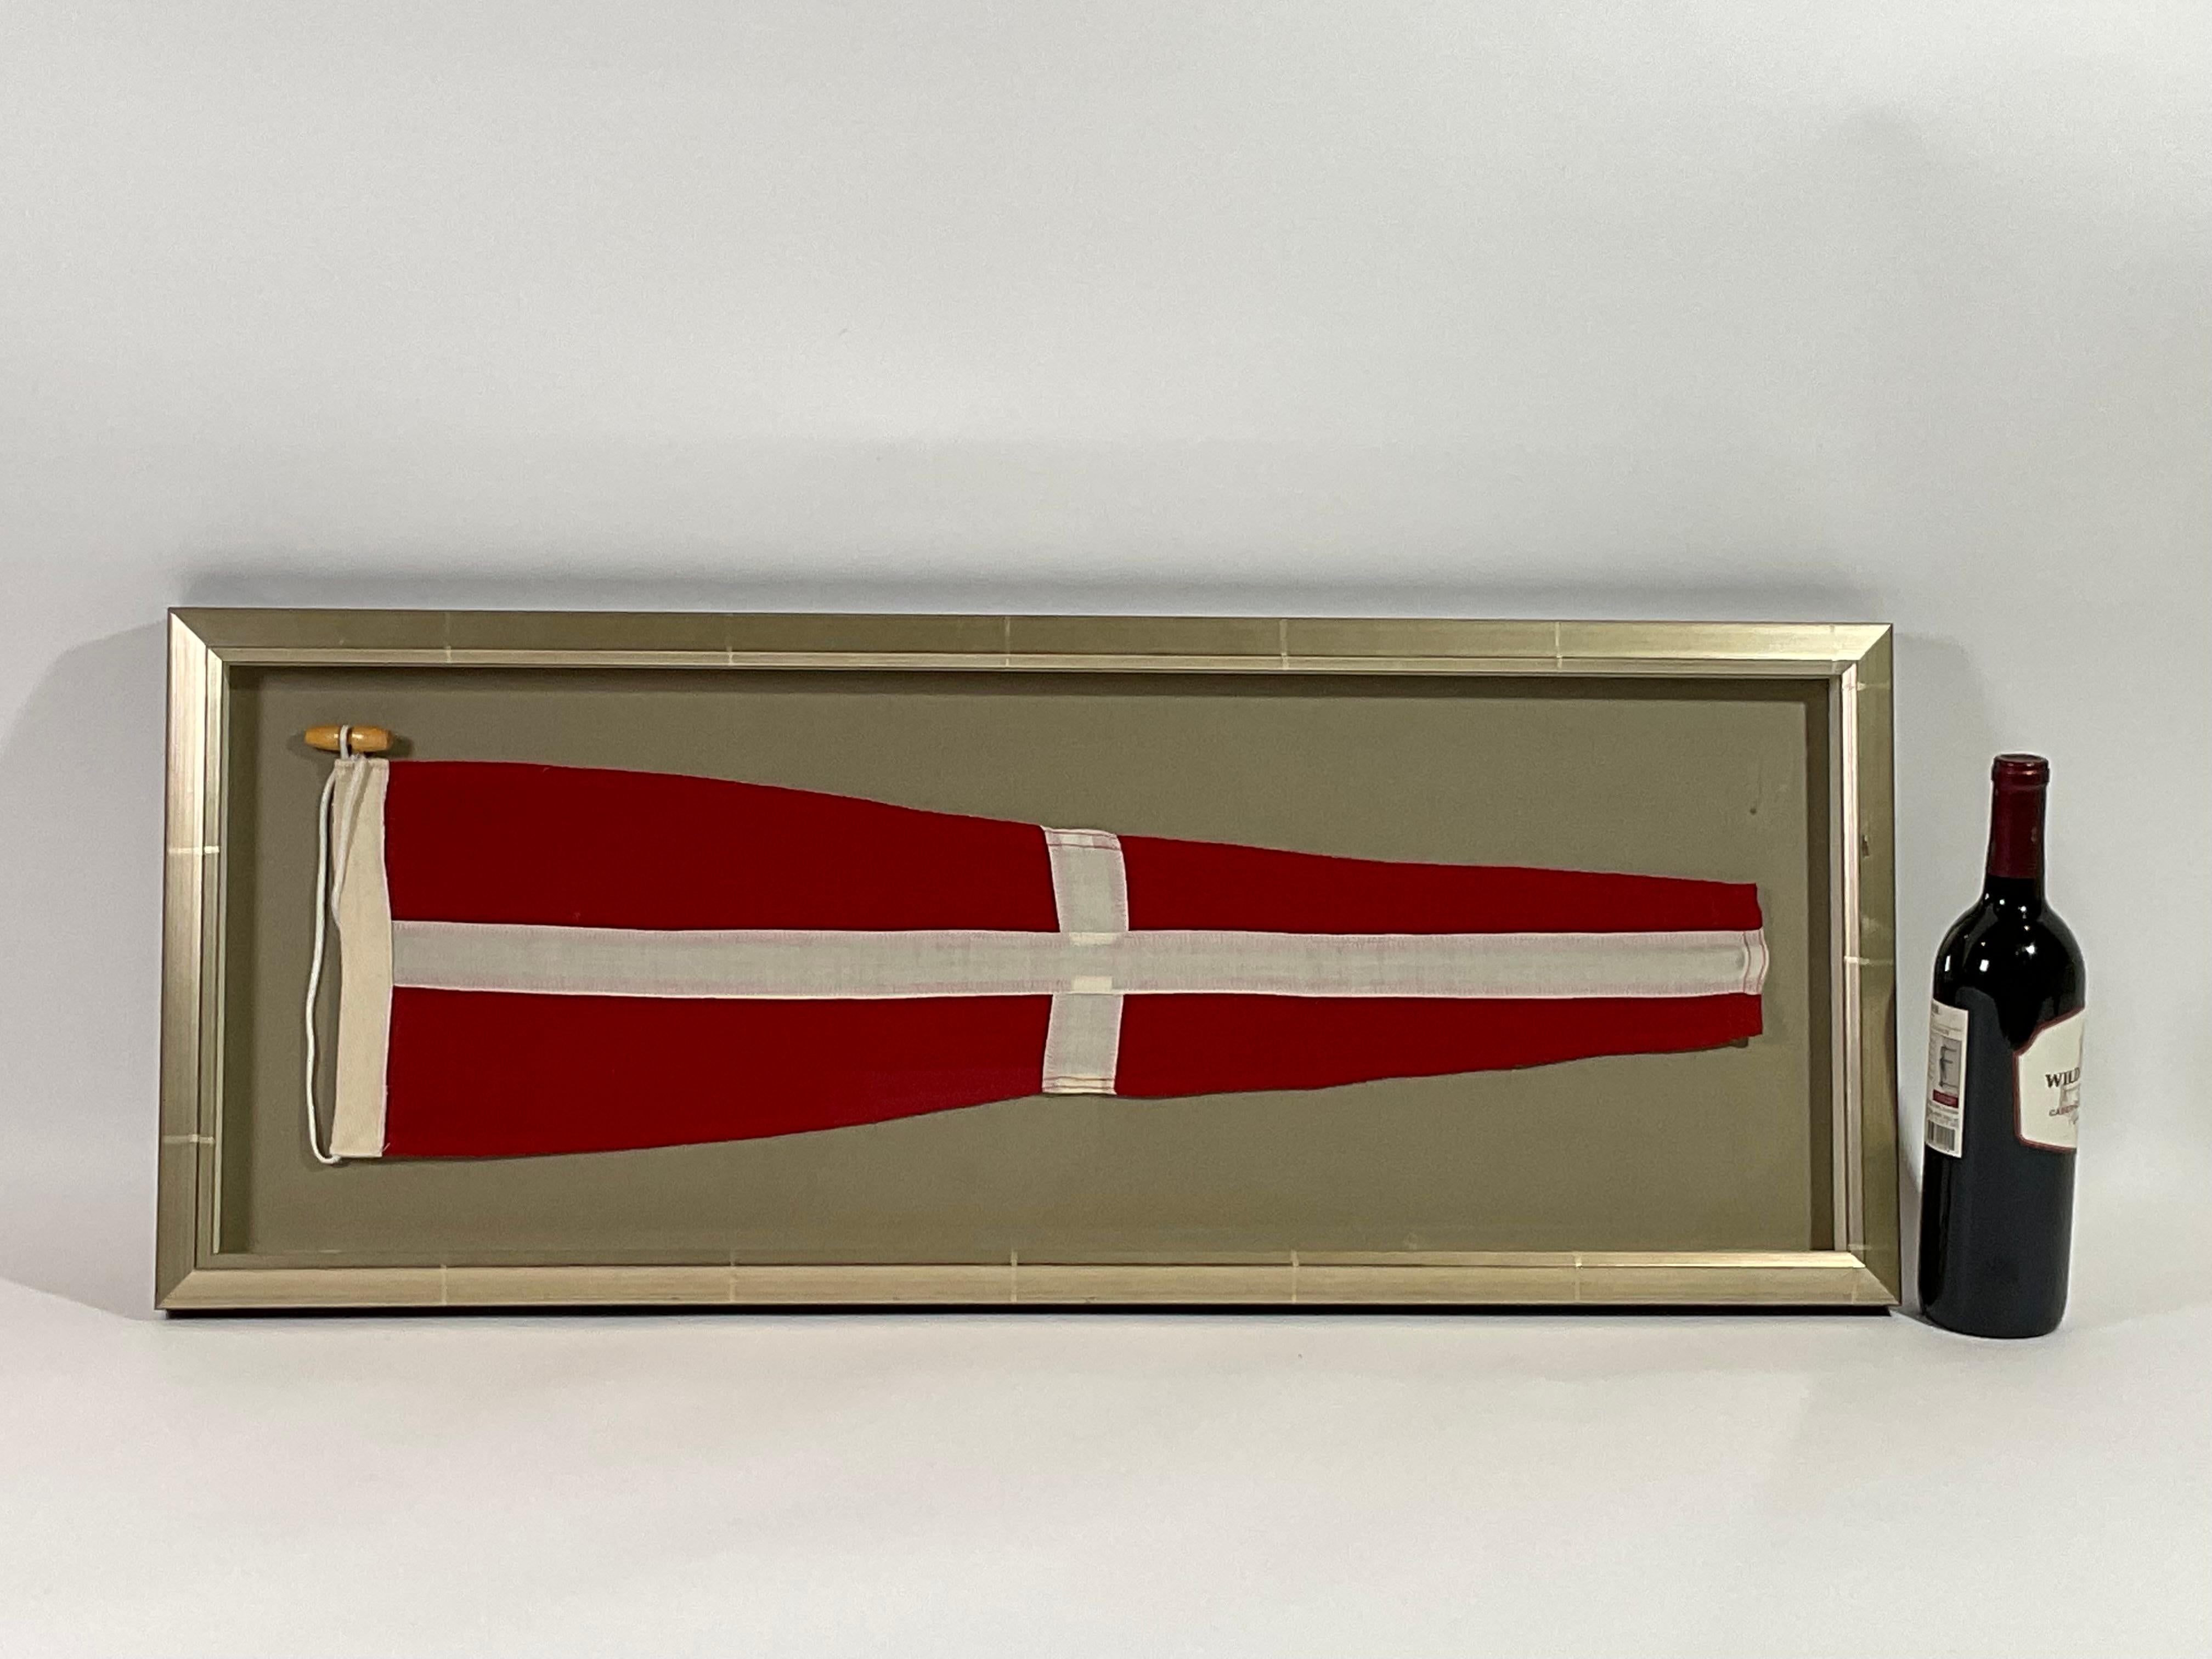 Framed maritime signal flag representing the number “4”, “FOUR” in the international code of signals. This authentic pennant is made of individual panels of red and white. Fitted to a heavy canvas hoist band with original cord and wood toggle. This